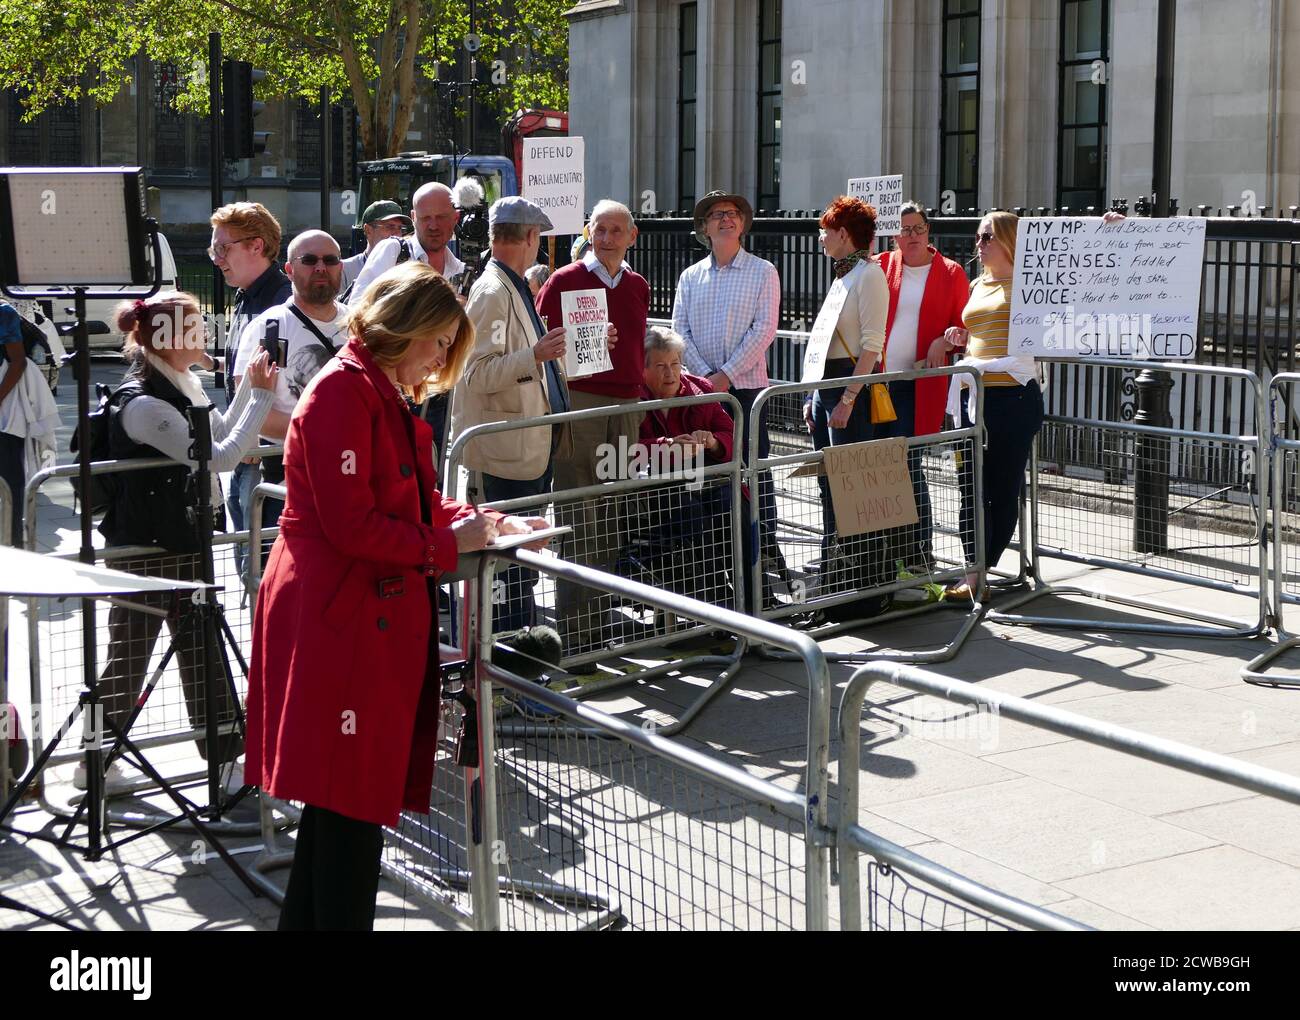 Press and 'Remain supporters' gather outside the Supreme Court in London to report on the hearing to challenge the Prorogation of Parliament. 17th Sept 2019.the prorogation of the Parliament, was ordered by Queen Elizabeth II upon the advice of the Conservative Prime Minister, Boris Johnson, on 28 August 2019. opposition politicians saw this as an unconstitutional attempt to reduce parliamentary scrutiny of the Government's Brexit plan. Stock Photo